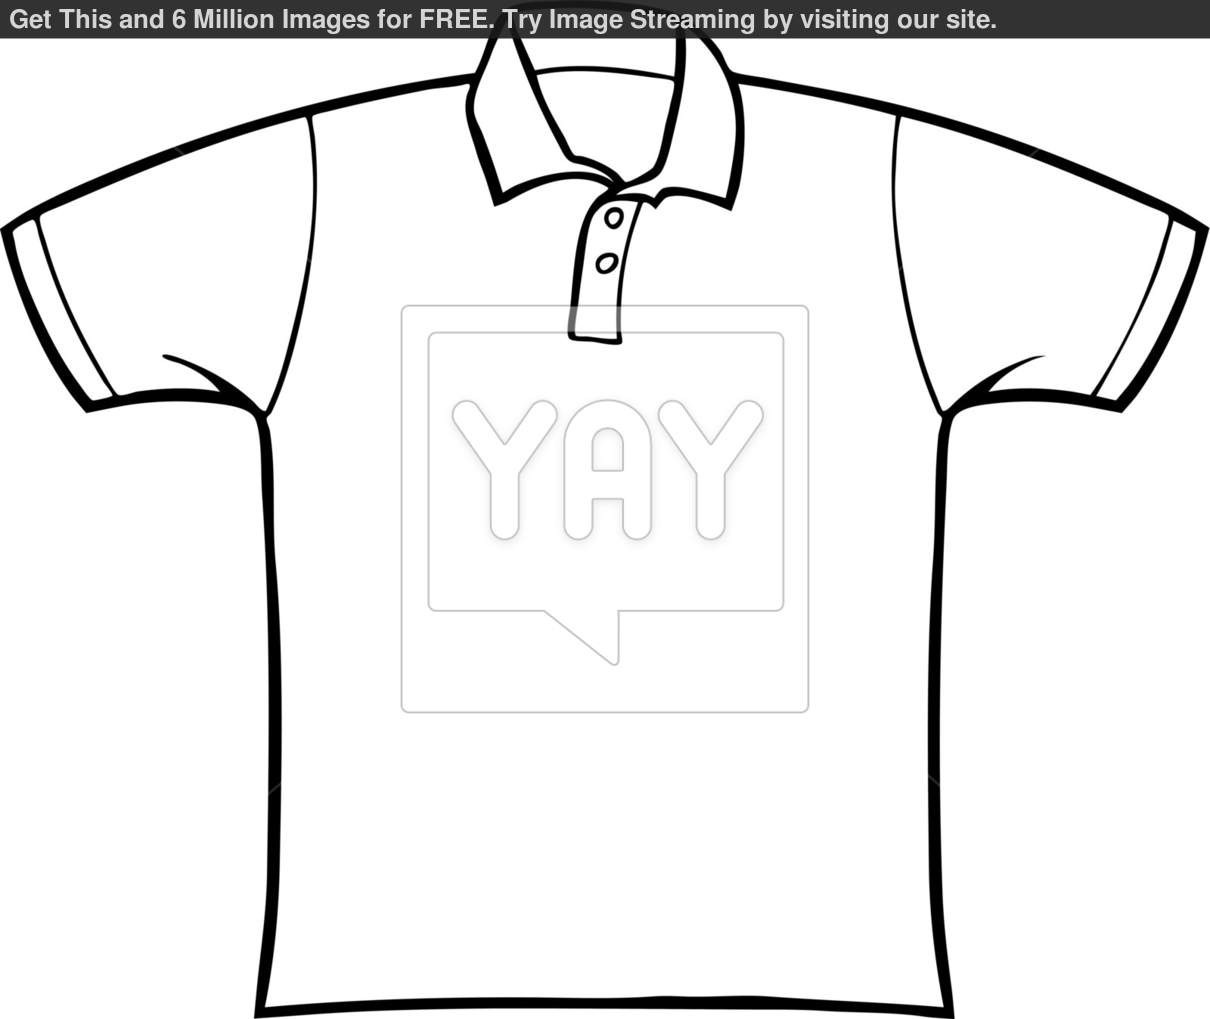 Plain Shirt Coloring Sheets For Girls
 Blank T Shirt Coloring Page thekindproject